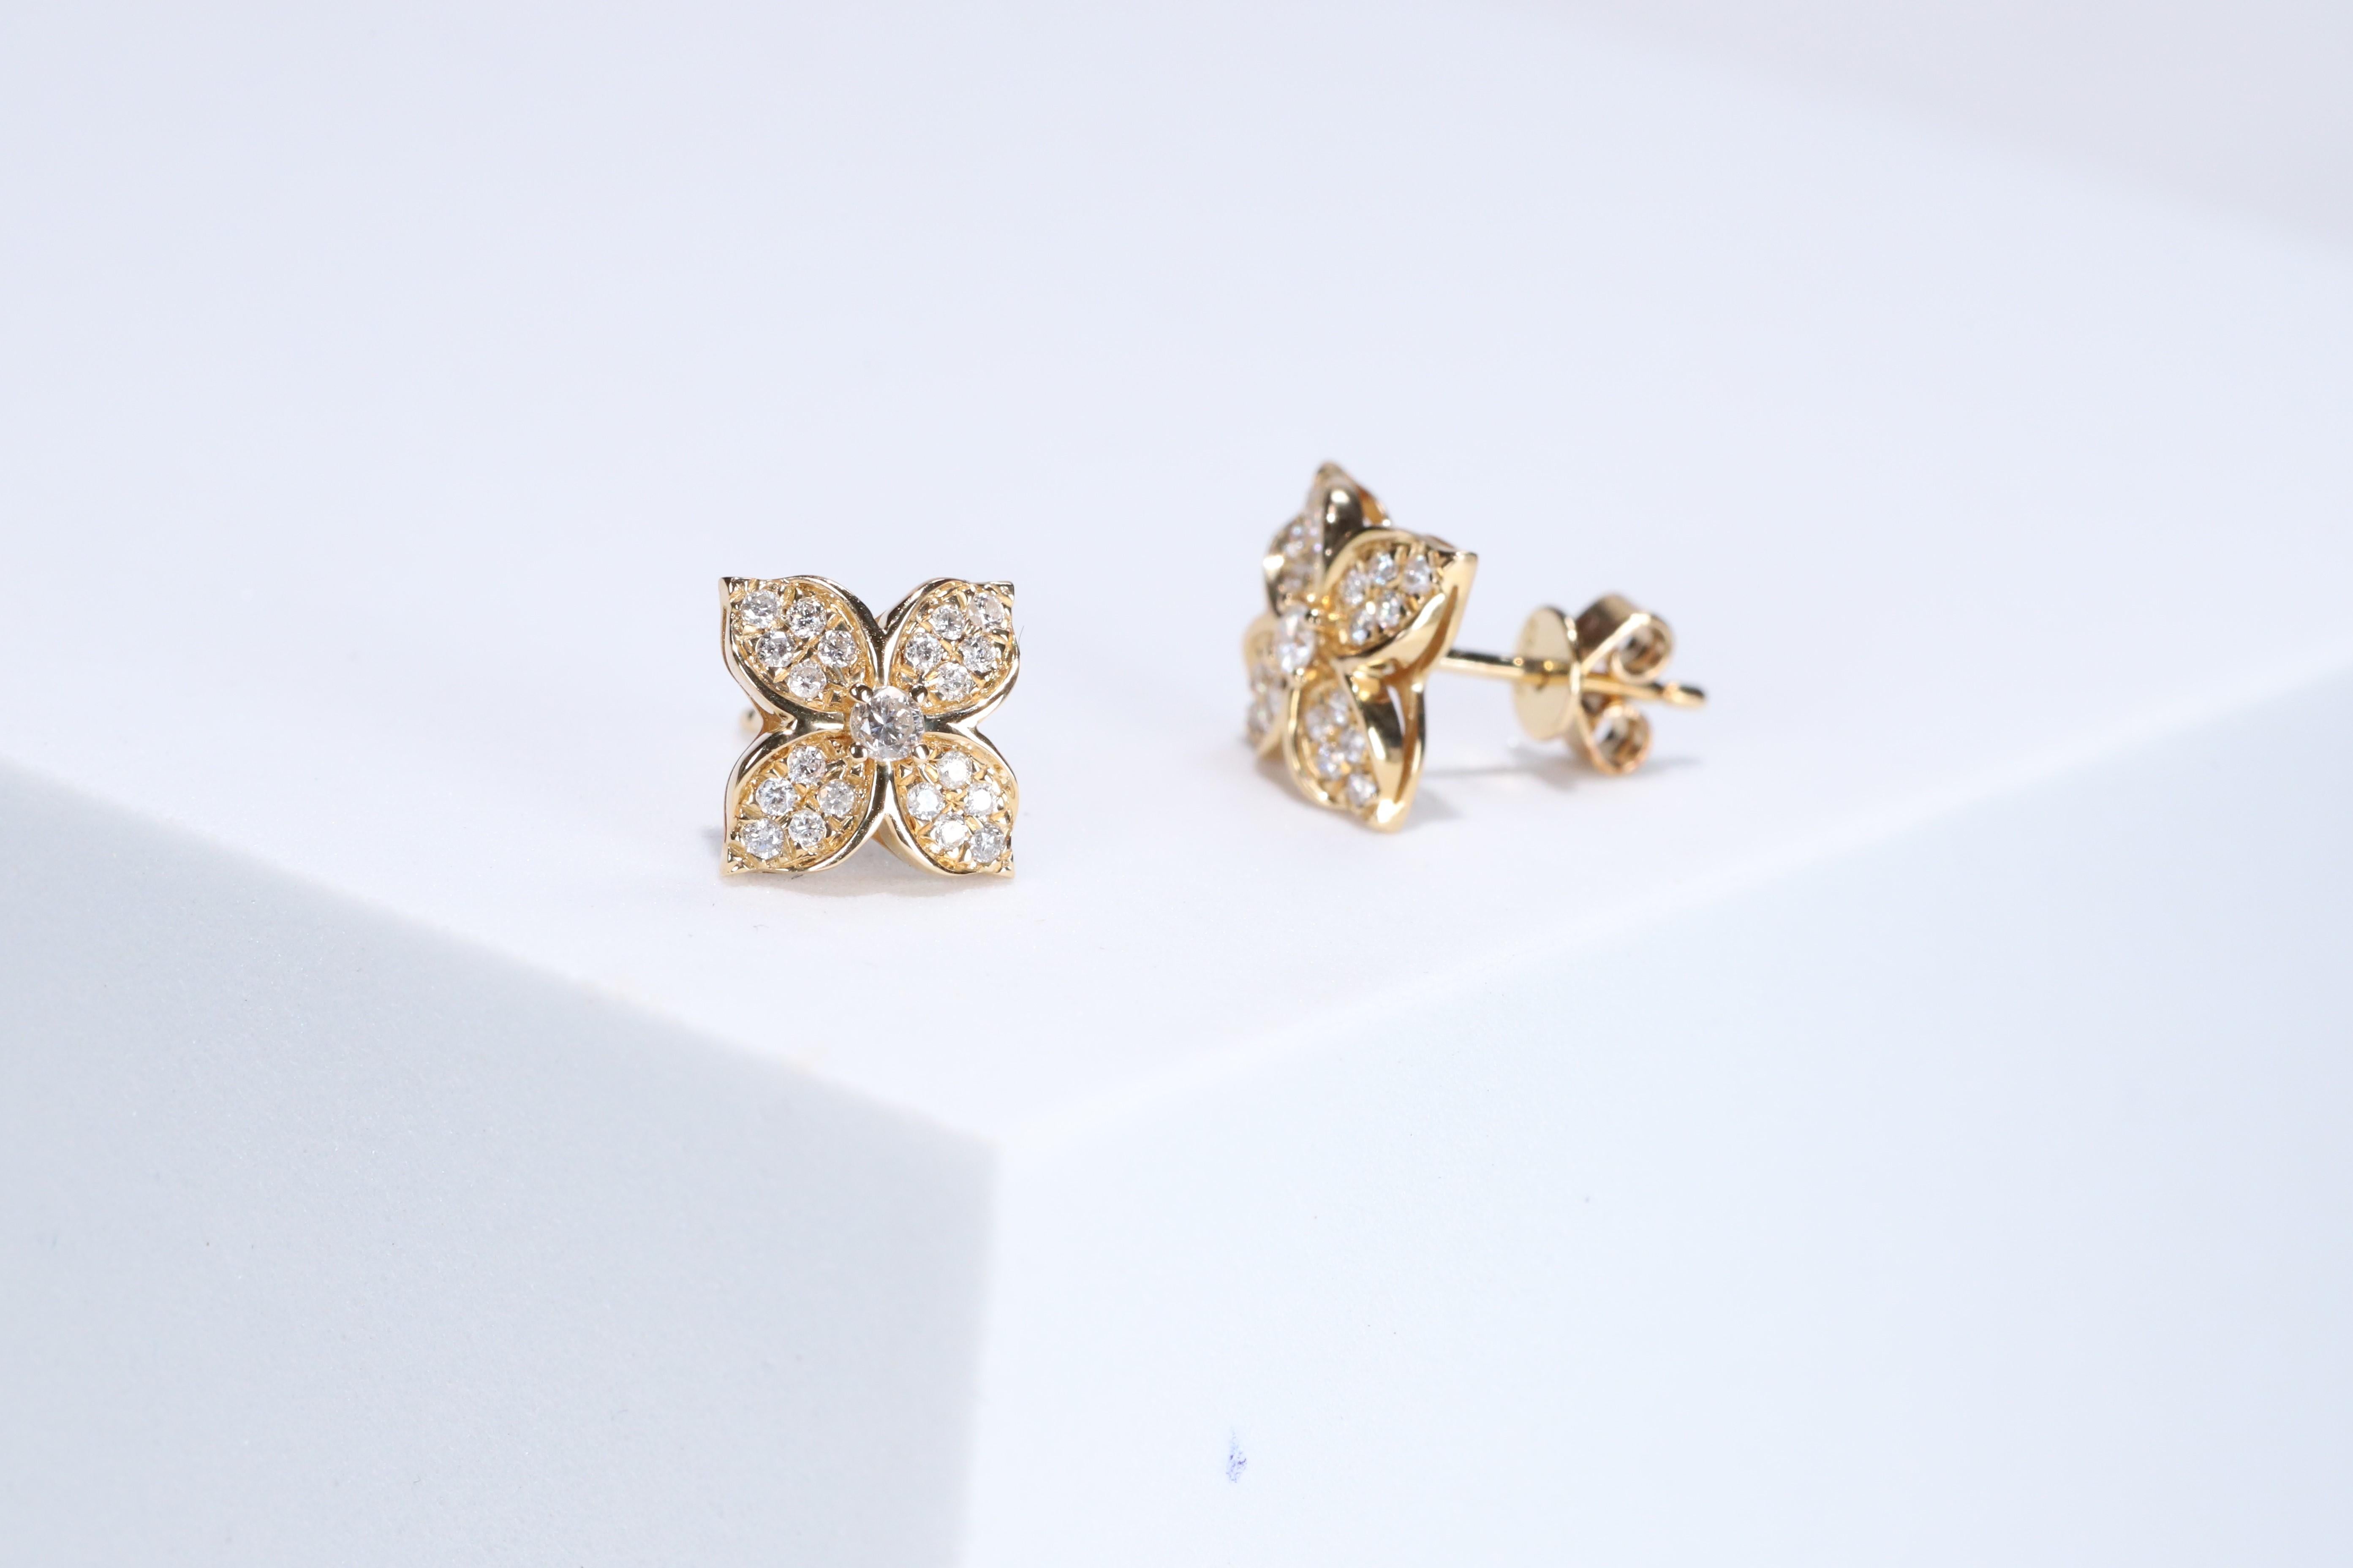 Decorate yourself in elegance with this Earring is crafted from 14-karat Yellow Gold by Gin & Grace Earring. This Earring is made up of Round-cut White Diamond (42 pcs) 0.27 carat. This Earring is weight 1.89 grams. This delicate Earring is polished